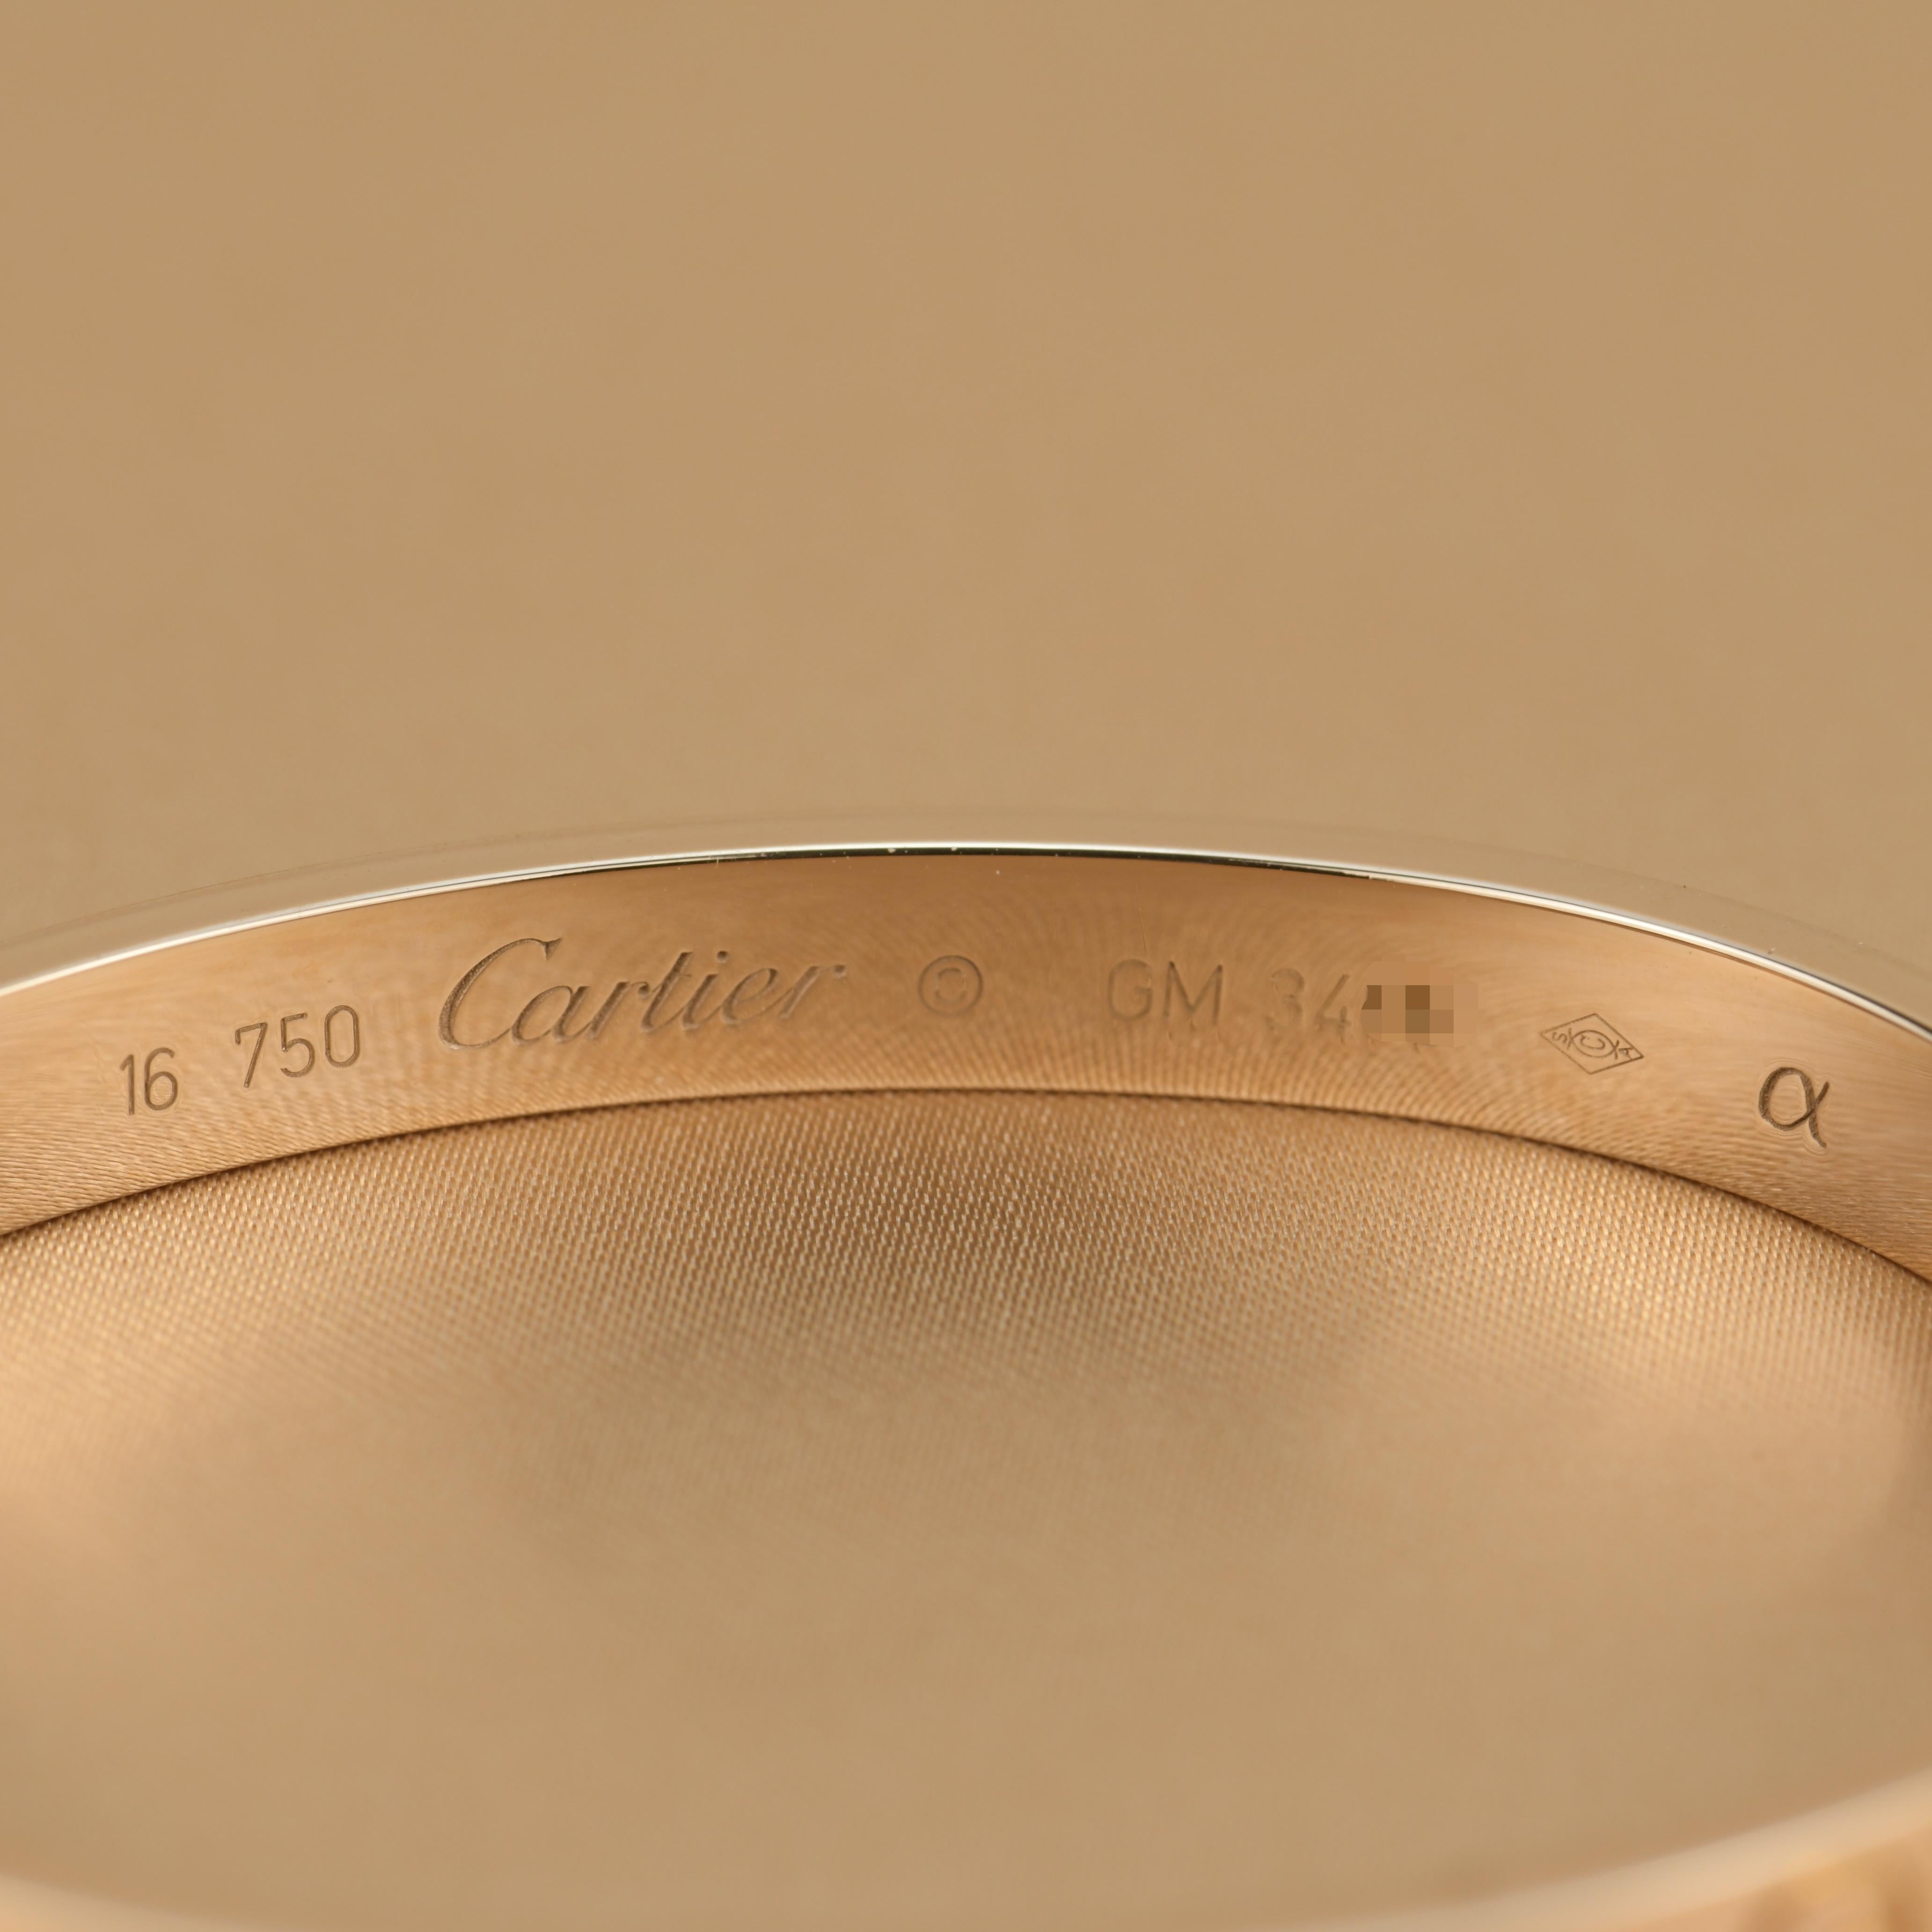 Cartier Love Bracelet 18K Rose Gold Size 16 In Excellent Condition For Sale In Banbury, GB